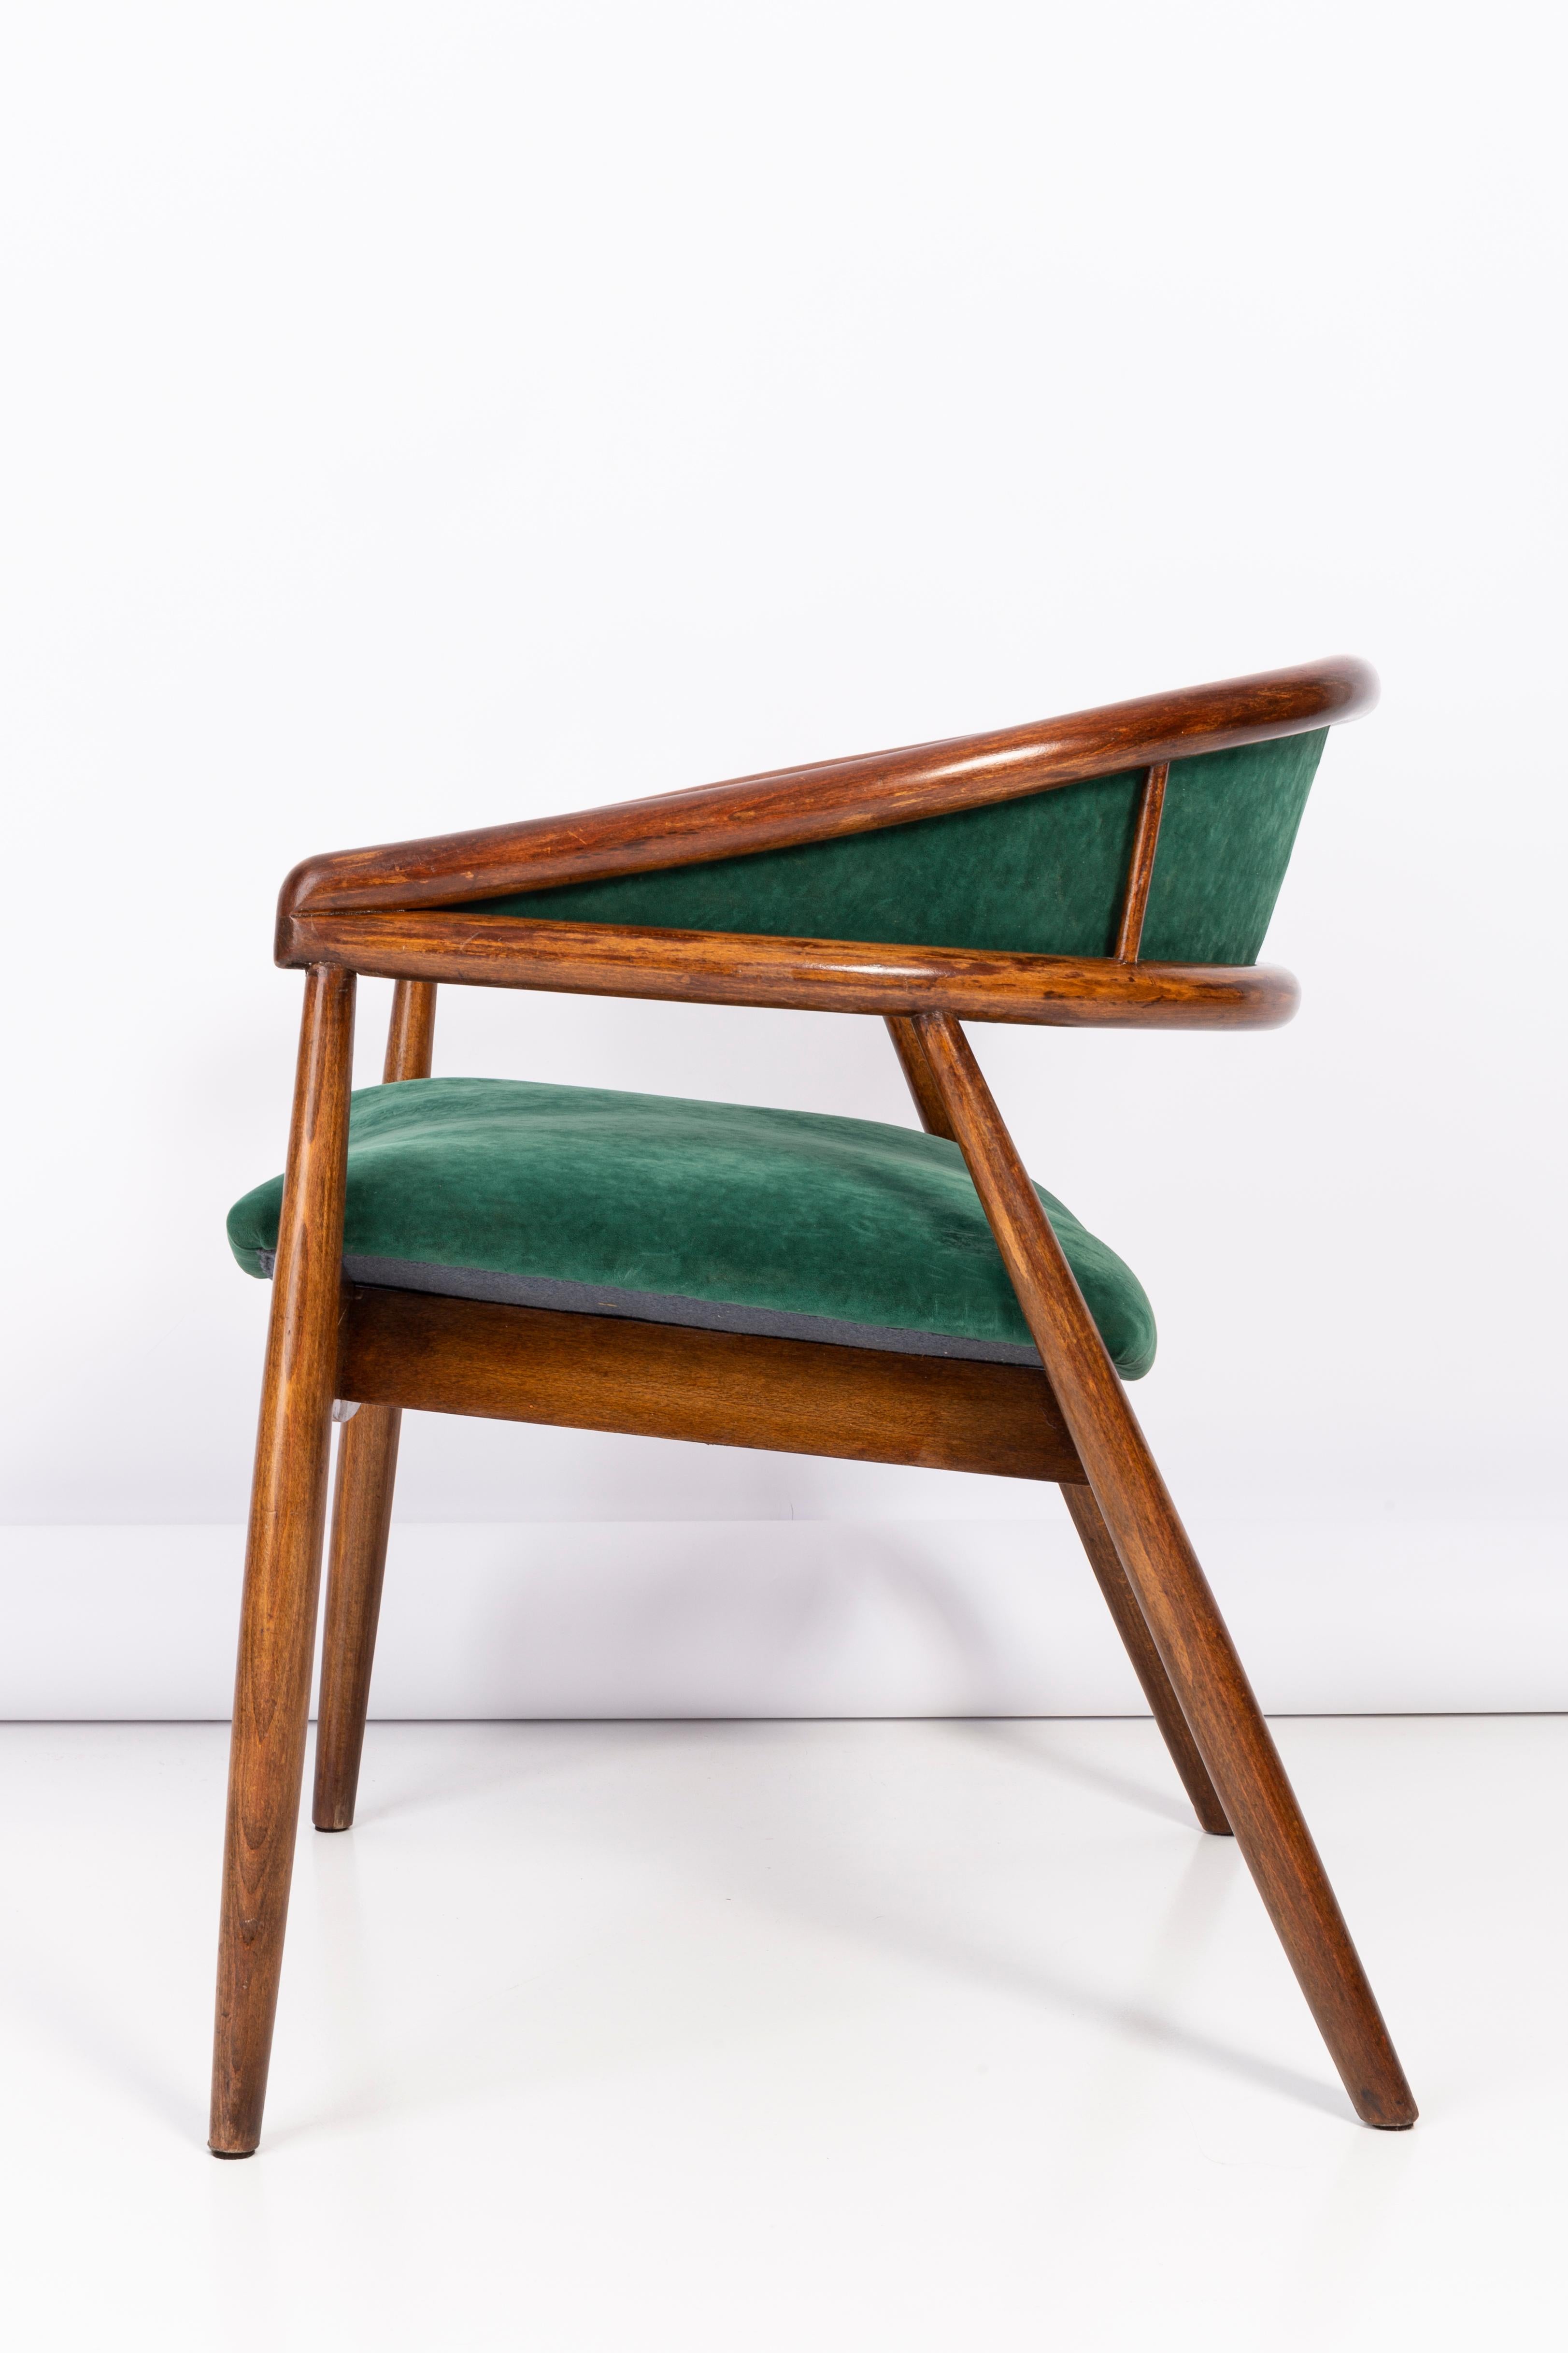 Set of Two James Mont Bent Beech Armchairs, Dark Green, B-3300 Type, 1960s For Sale 2